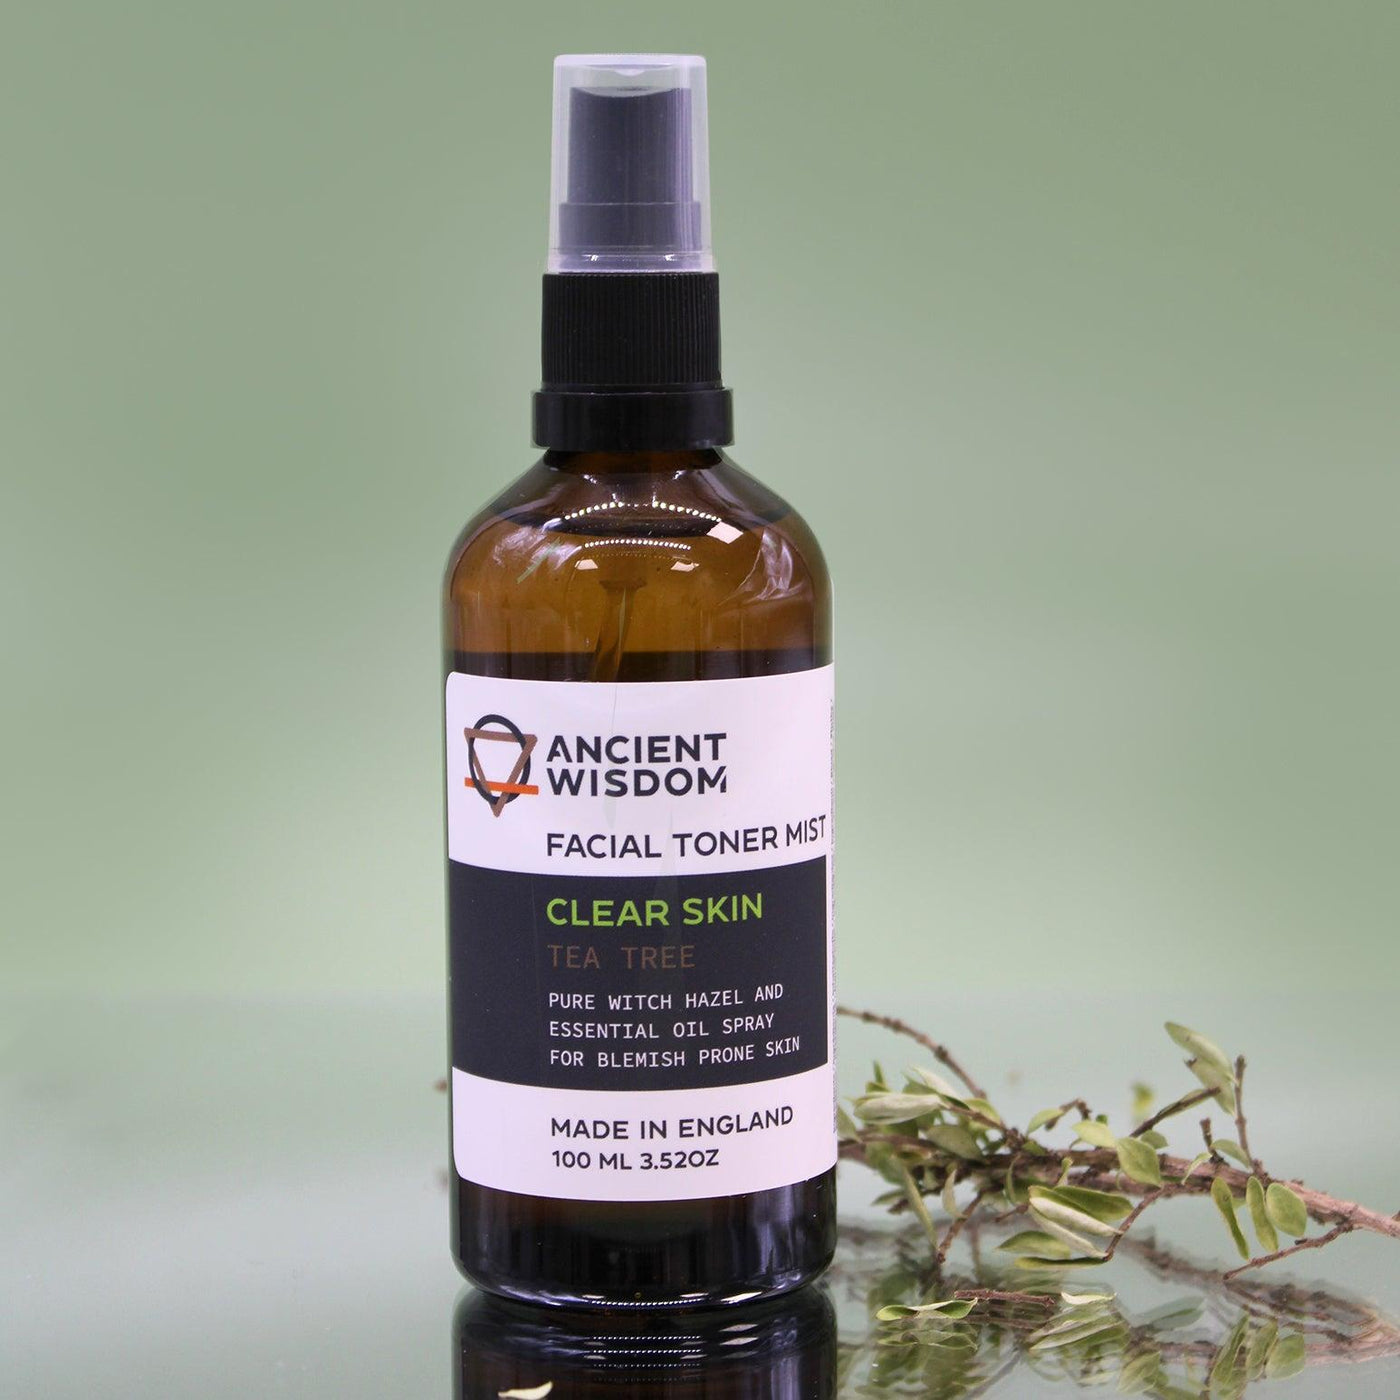 Essential Oil Witch Hazel And Tea Tree Facial Toner Mist For Clear Skin.